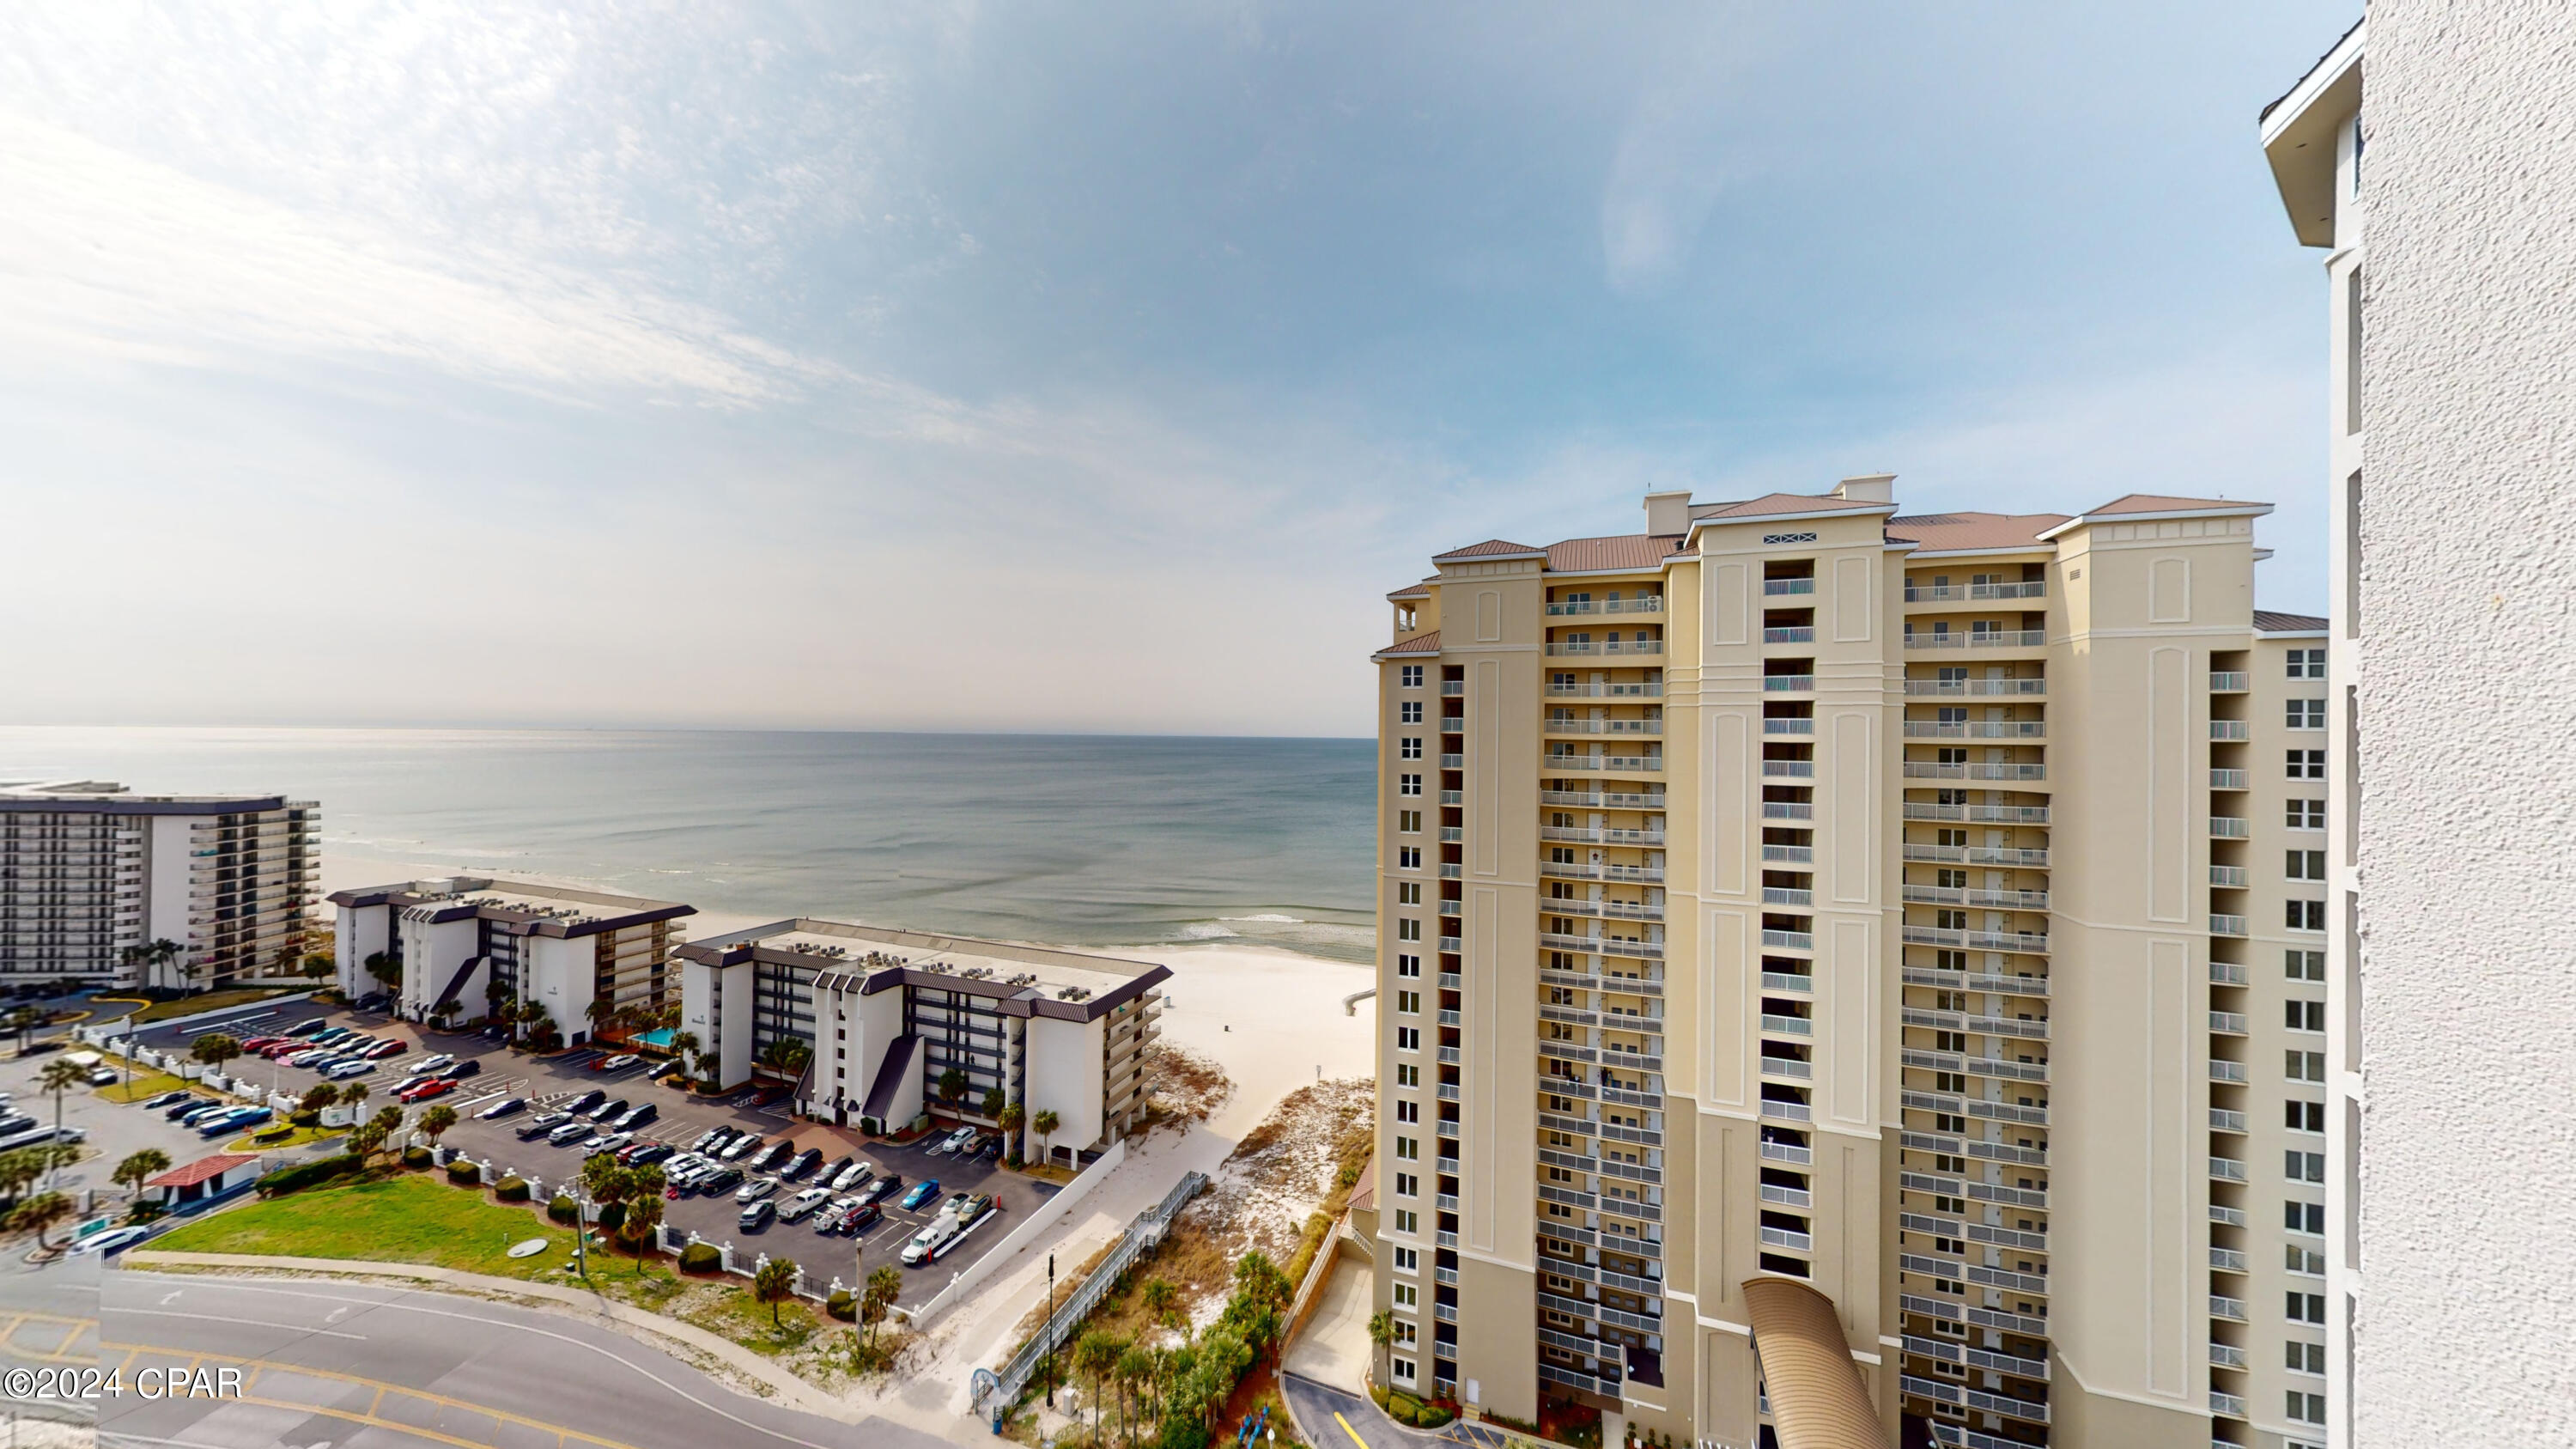 NEW PRICE IMPROVEMENT!Grand Panama Beach Resort is one of most desired Resorts in Panama City Beach.  Centrally located close to great restaurants, shopping & many attractions. This resort also offers many great amenities including a beachfront resort style heated pool, a rooftop heated pool, hot tubs, beach side tiki bar (seasonal), BBQ grills, large fitness center, onsite general store, onsite bistro, 24-hour security & covered garage parking, enclosed walk-over and much more. 1 bedroom 2 full baths plus bunk area. Sleeps 6 comfortably. A large patio with amazing views of the Gulf of Mexico. Open kitchen with granite countertops & stainless-steel appliances. HVAC replaced 2 years ago, new washer and dryer, This condo is in perfect condition, 13th floor allows beautiful Gulf views.